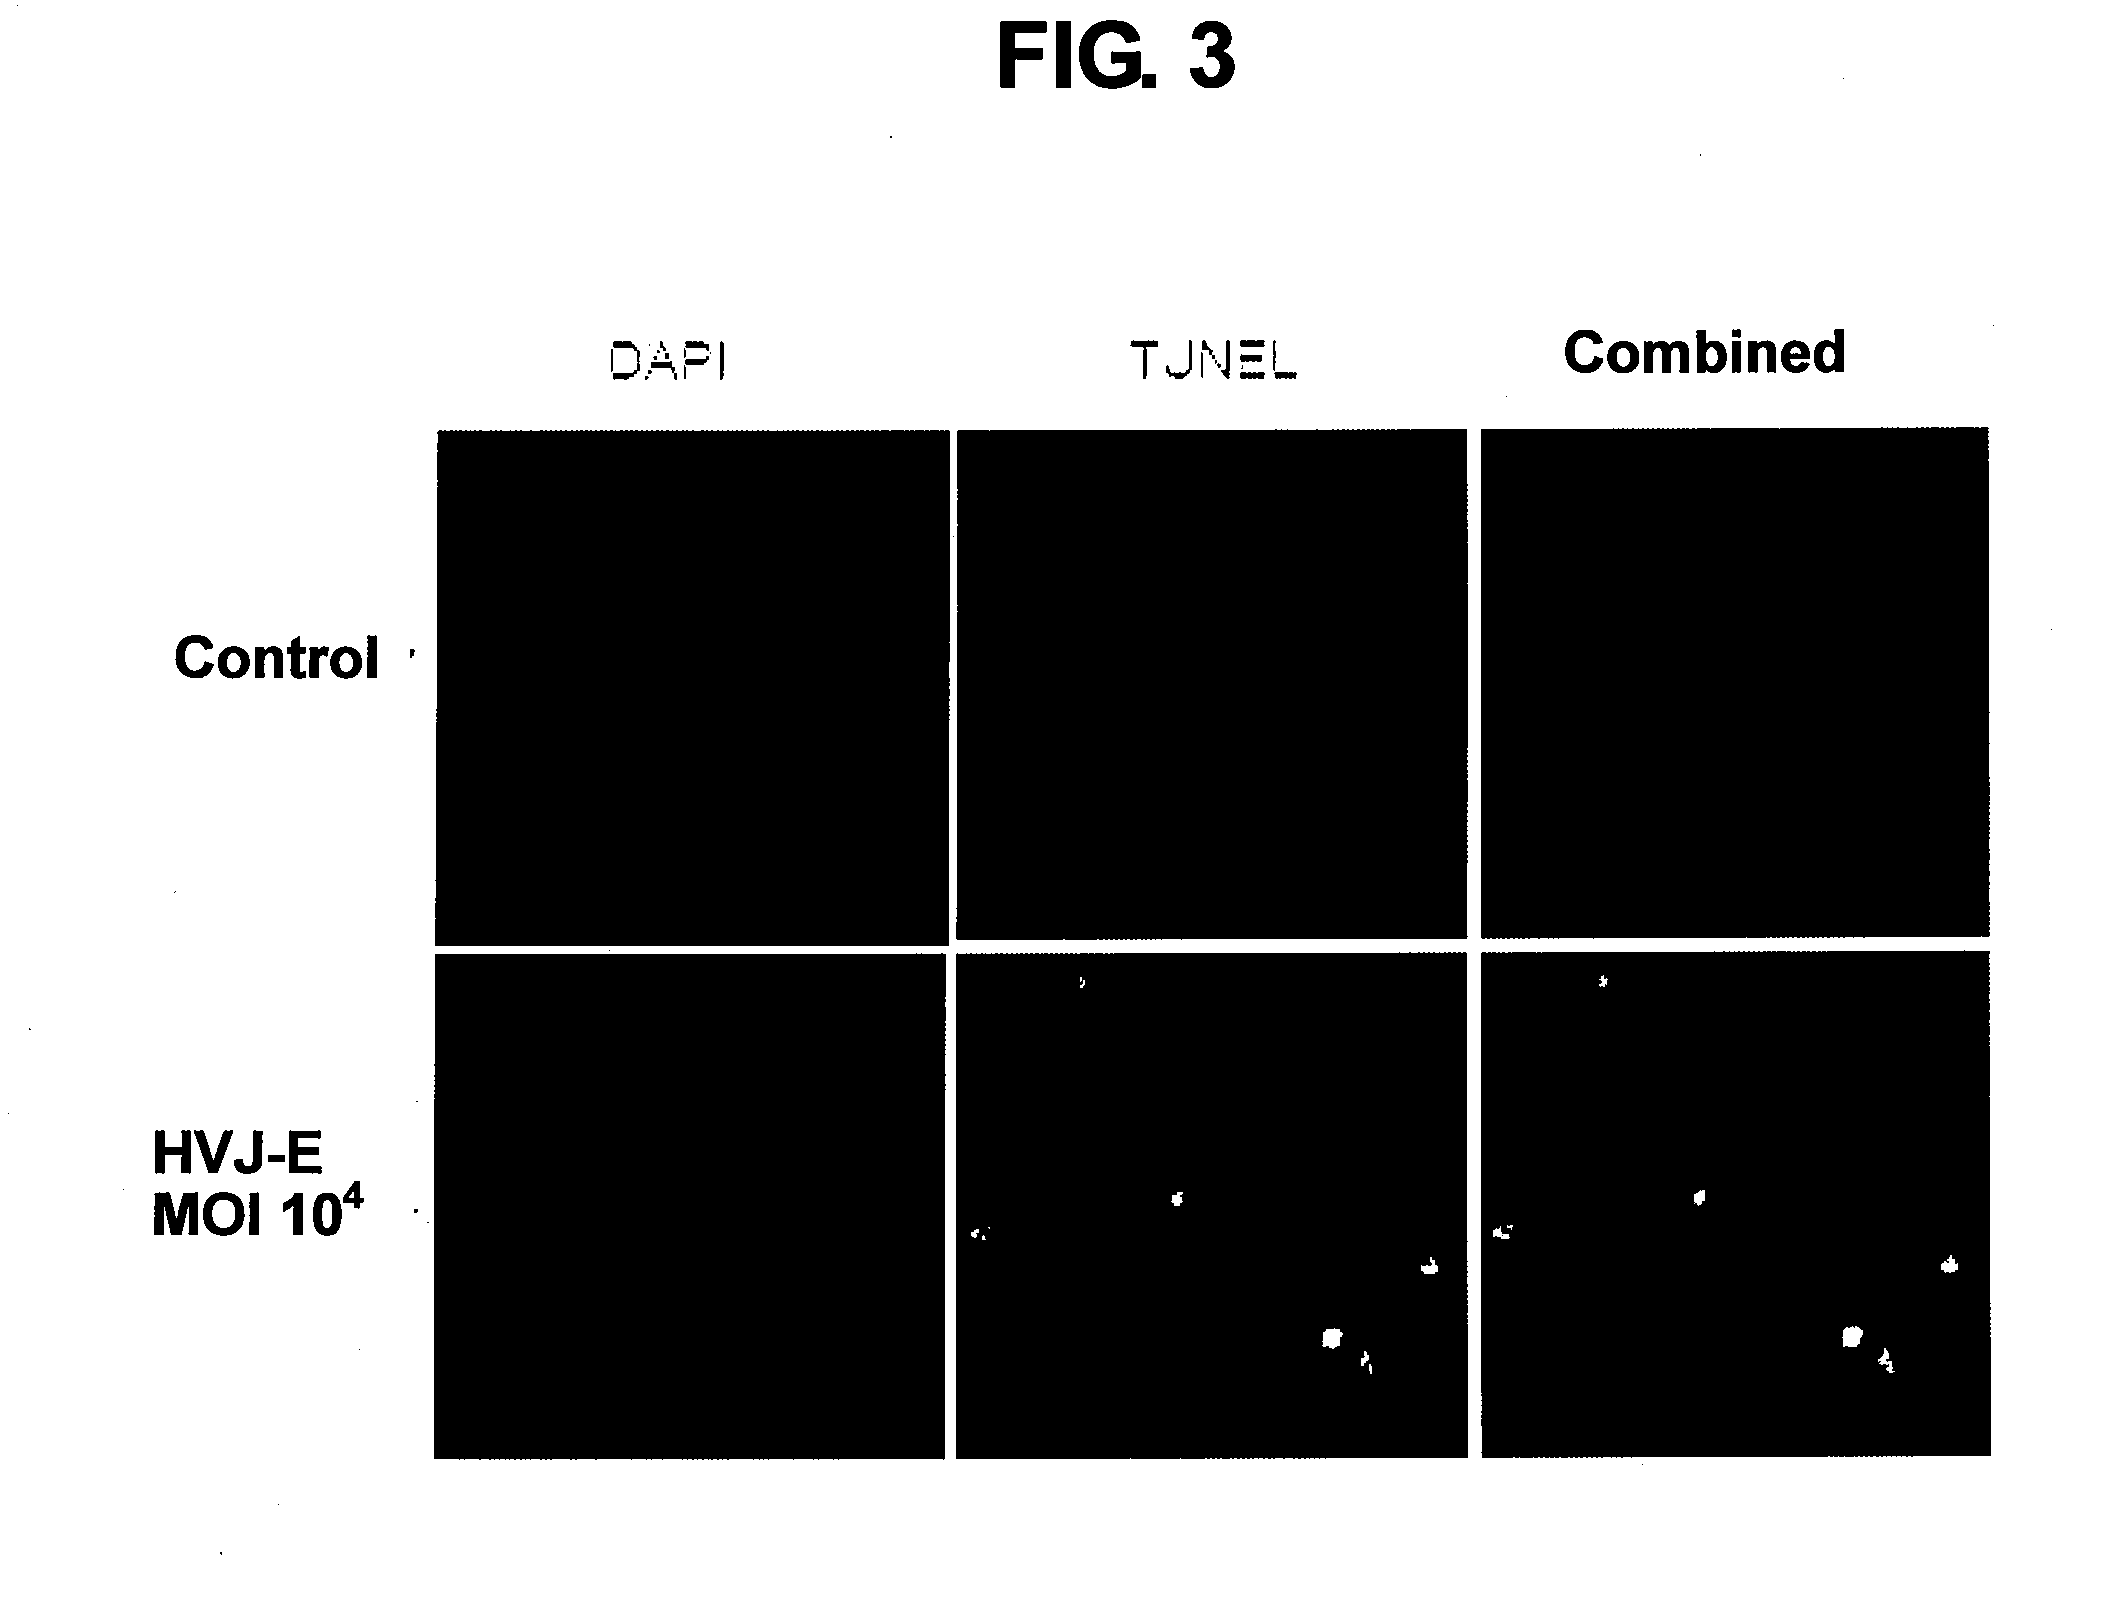 Therapeutic/prophylactic agent for prostate cancer